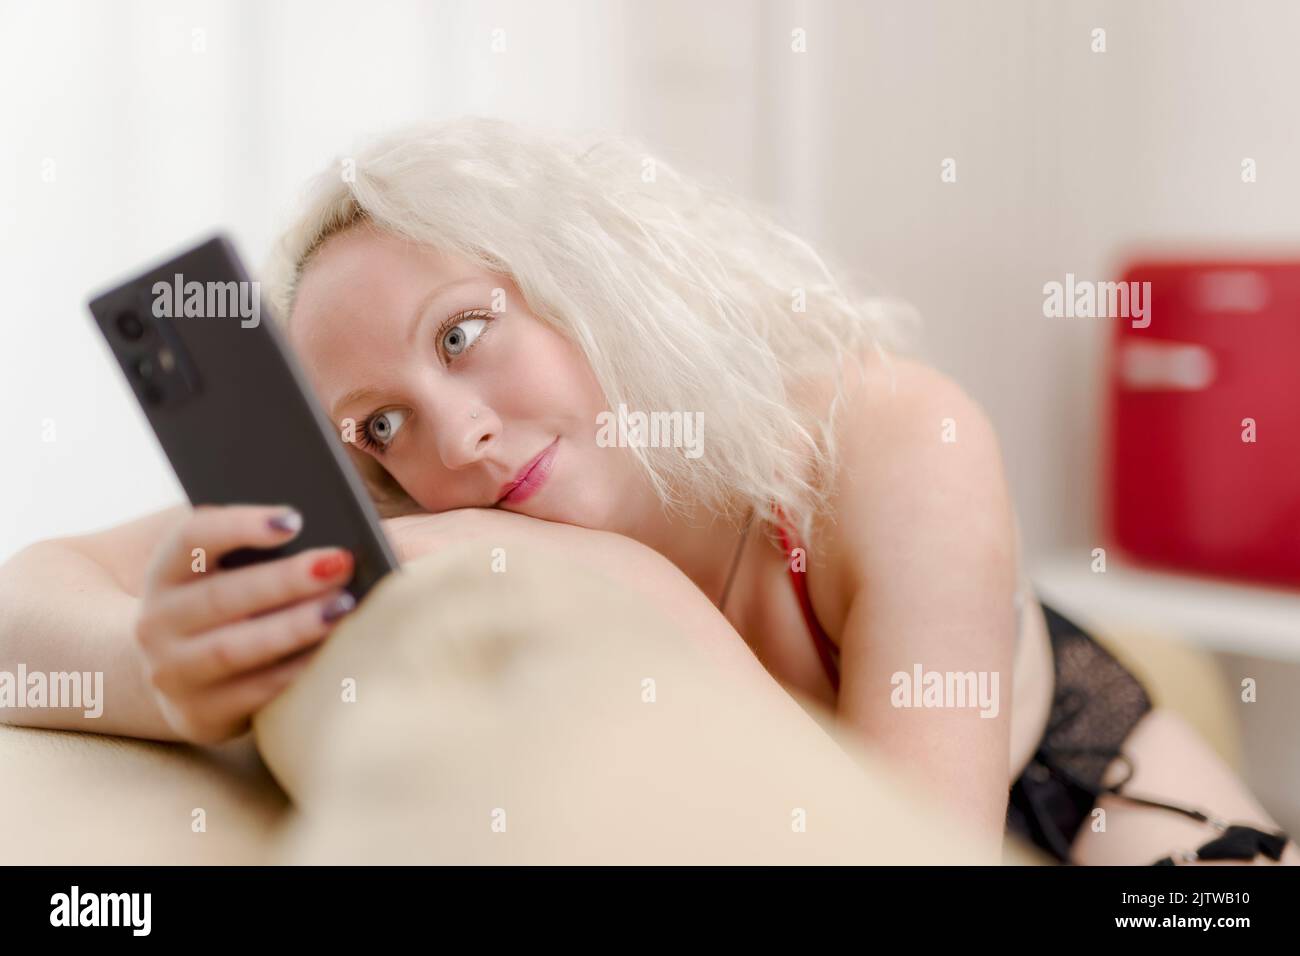 Blond woman work from home Stock Photo